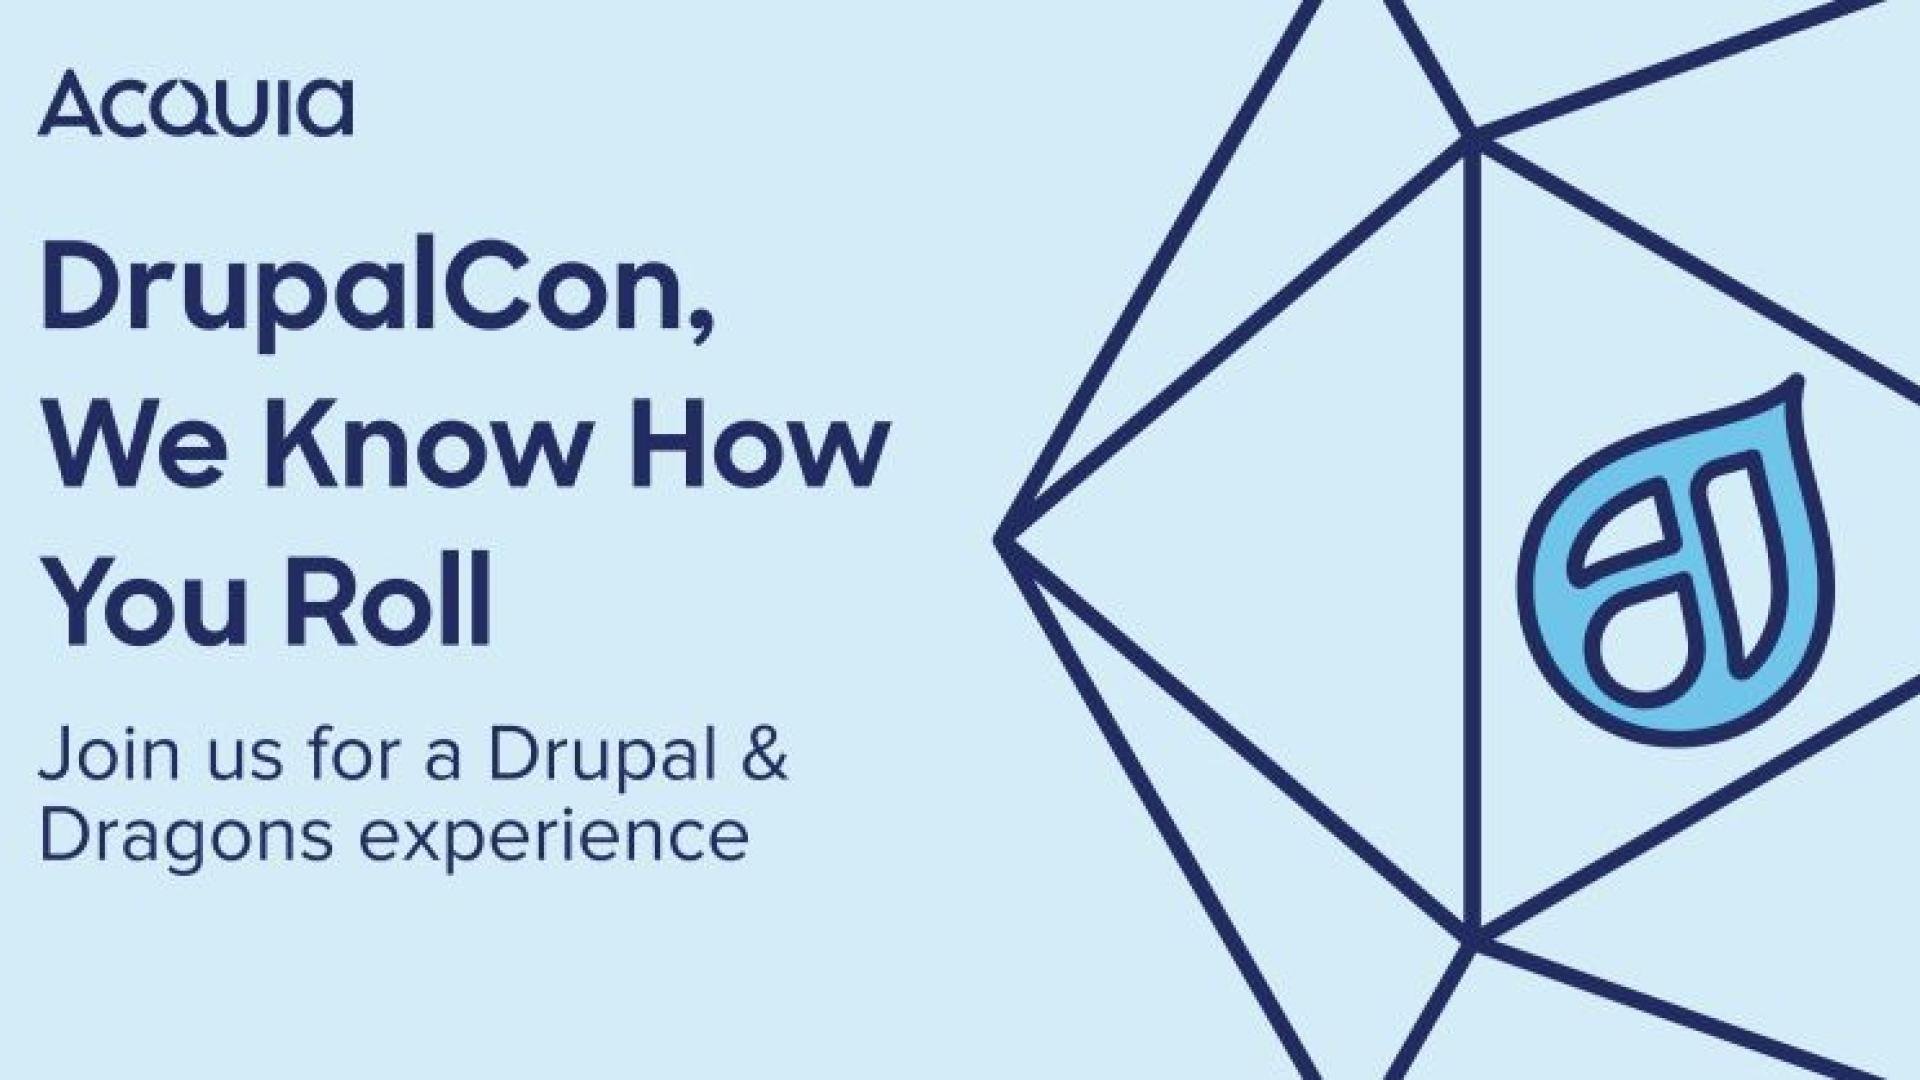 DrupalCon, We Know How you roll